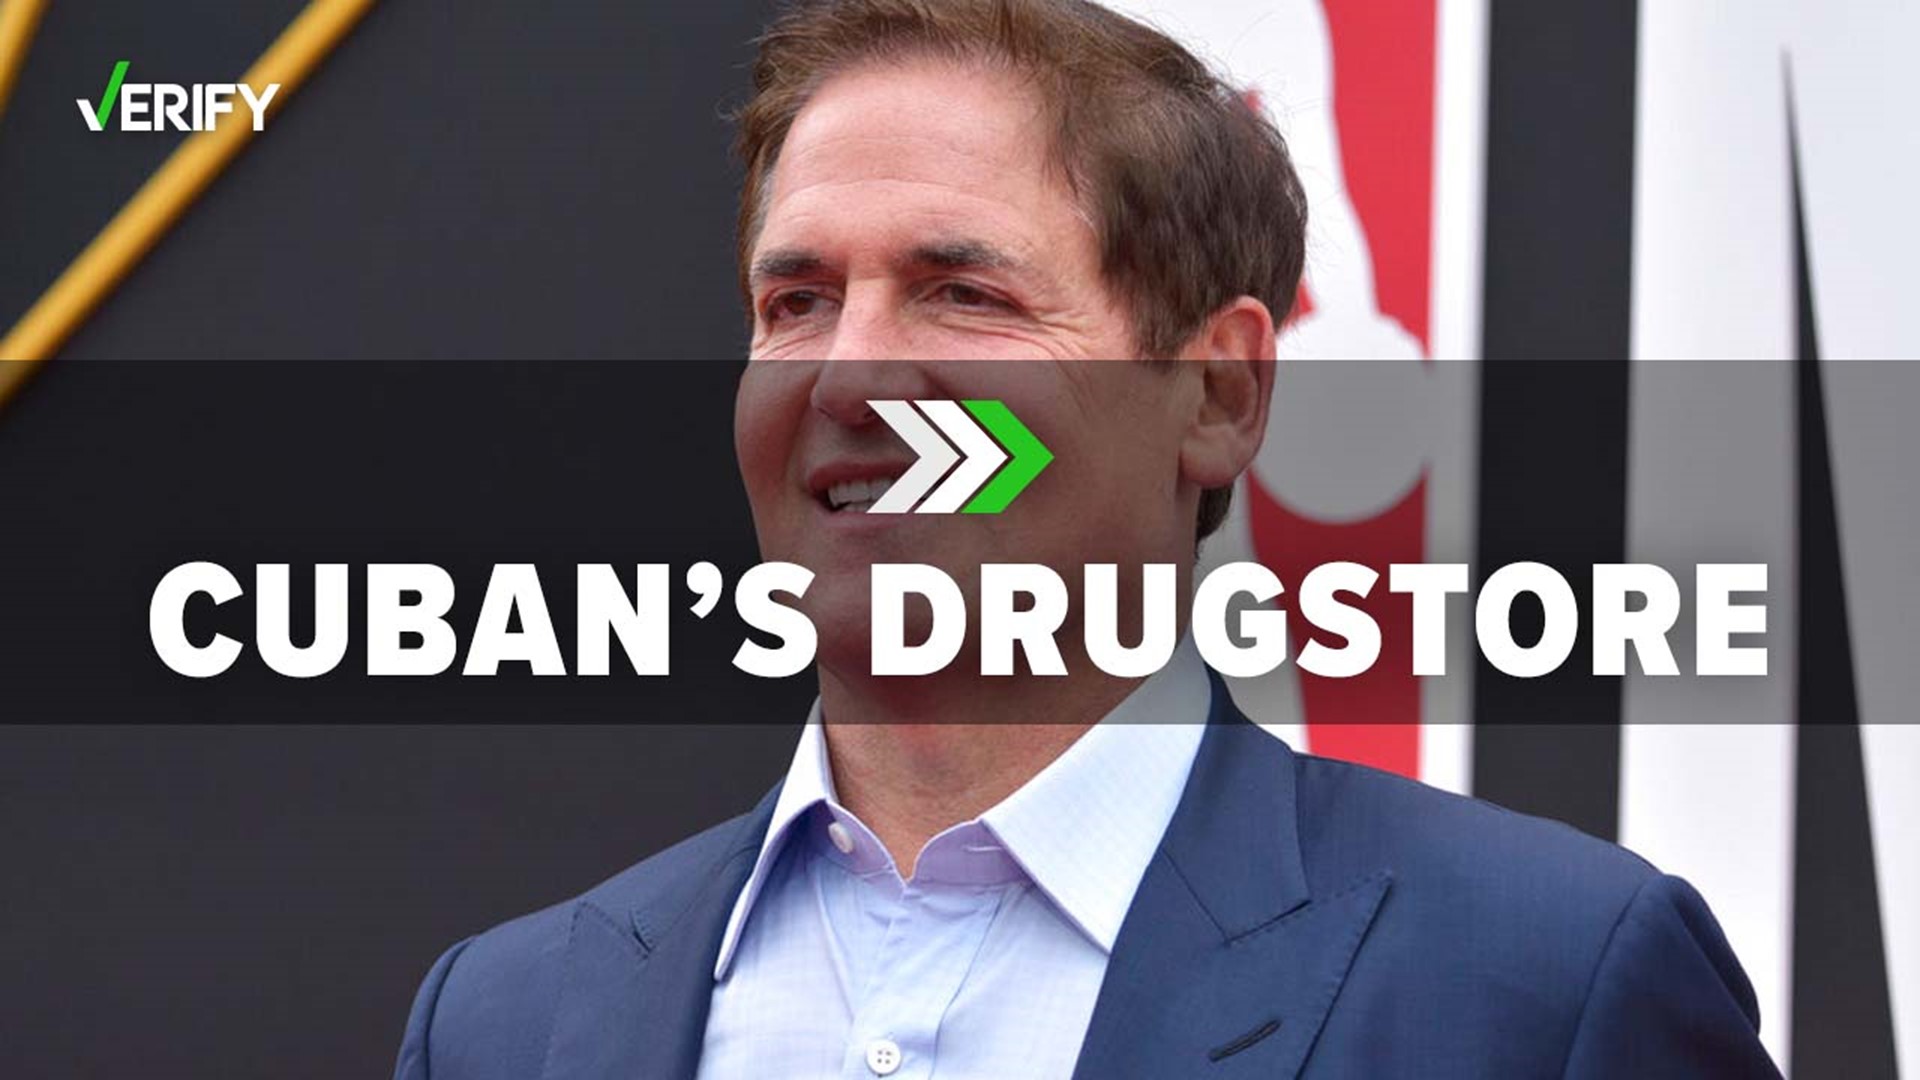 Mark Cuban Cost Plus Drug Company is a real wholesale drug distributor that works with an accredited pharmacy.